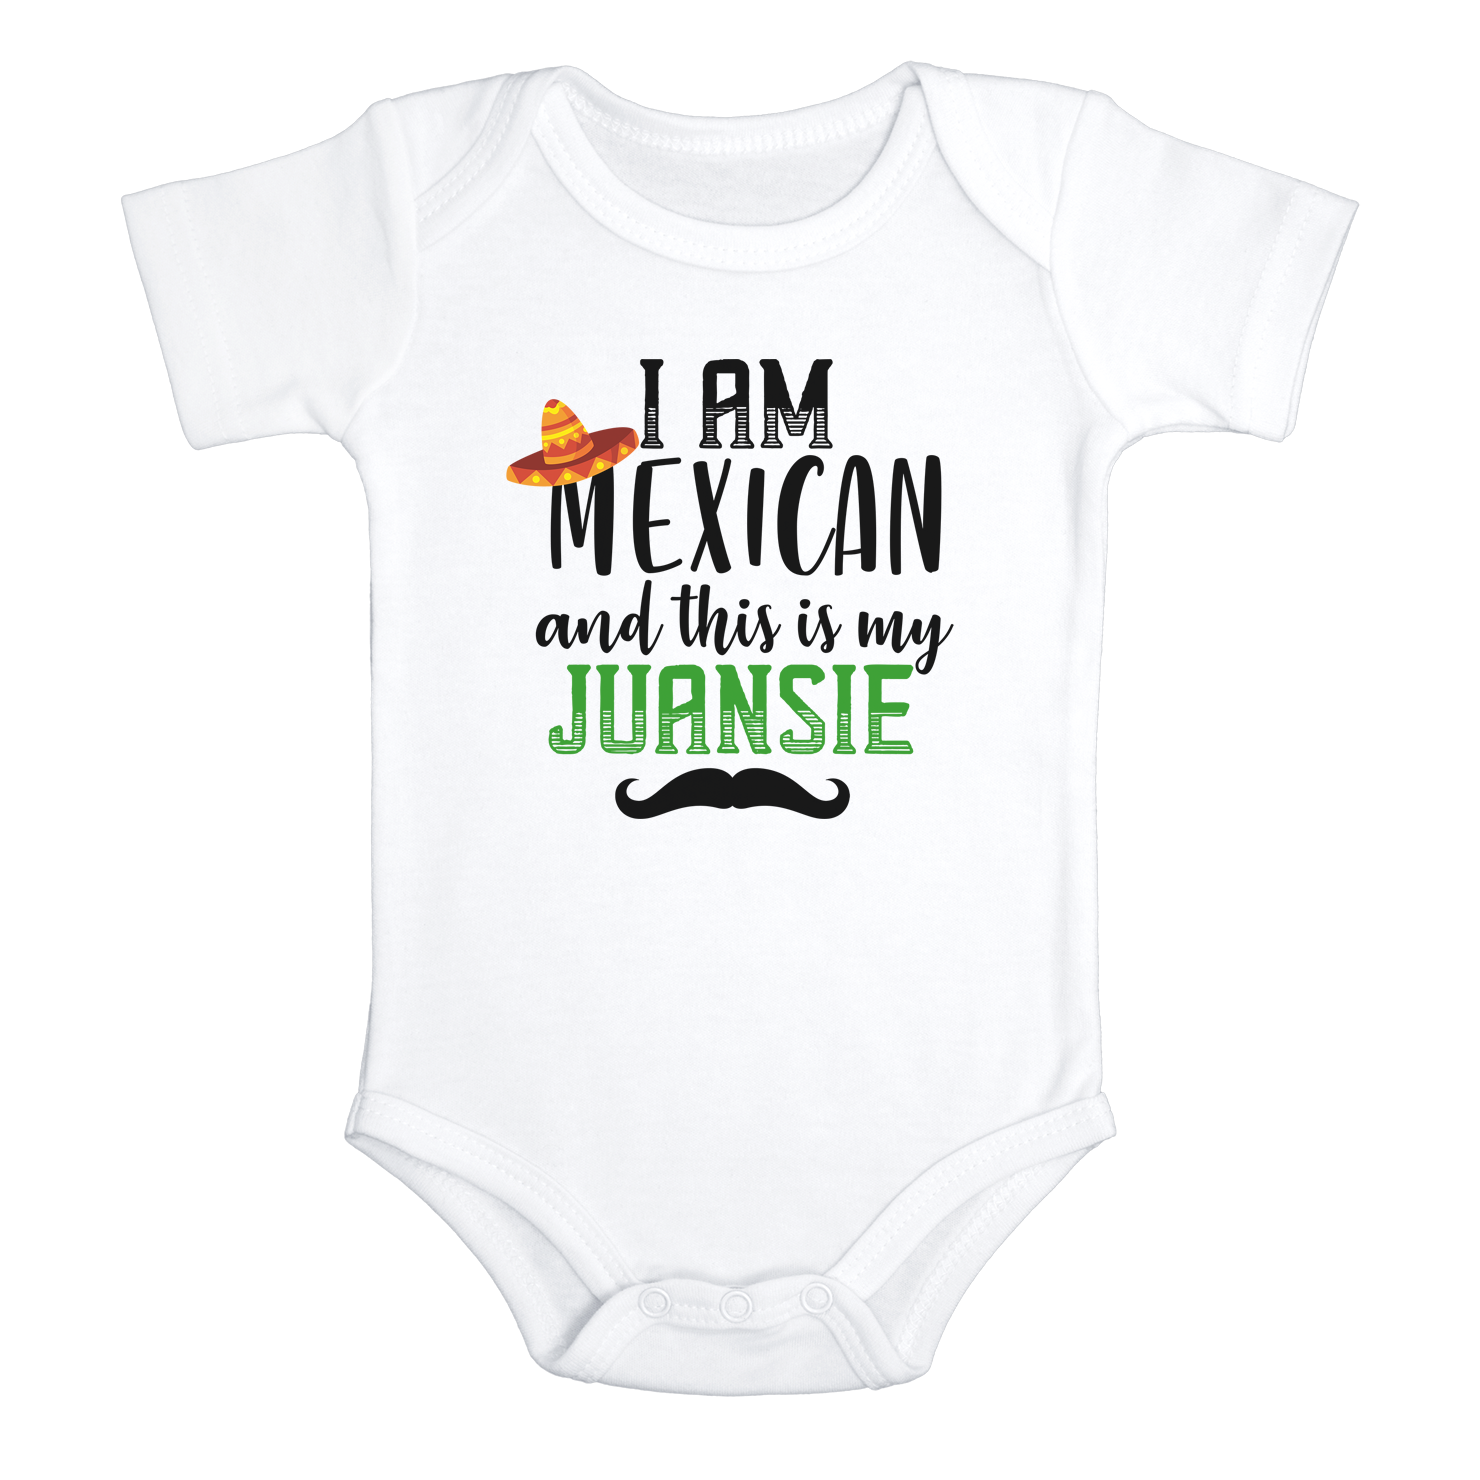 I AM MEXICAN AND THIS IS MY JUANSIE Funny baby onesies bodysuit (white: short or long sleeve) - HappyAddition